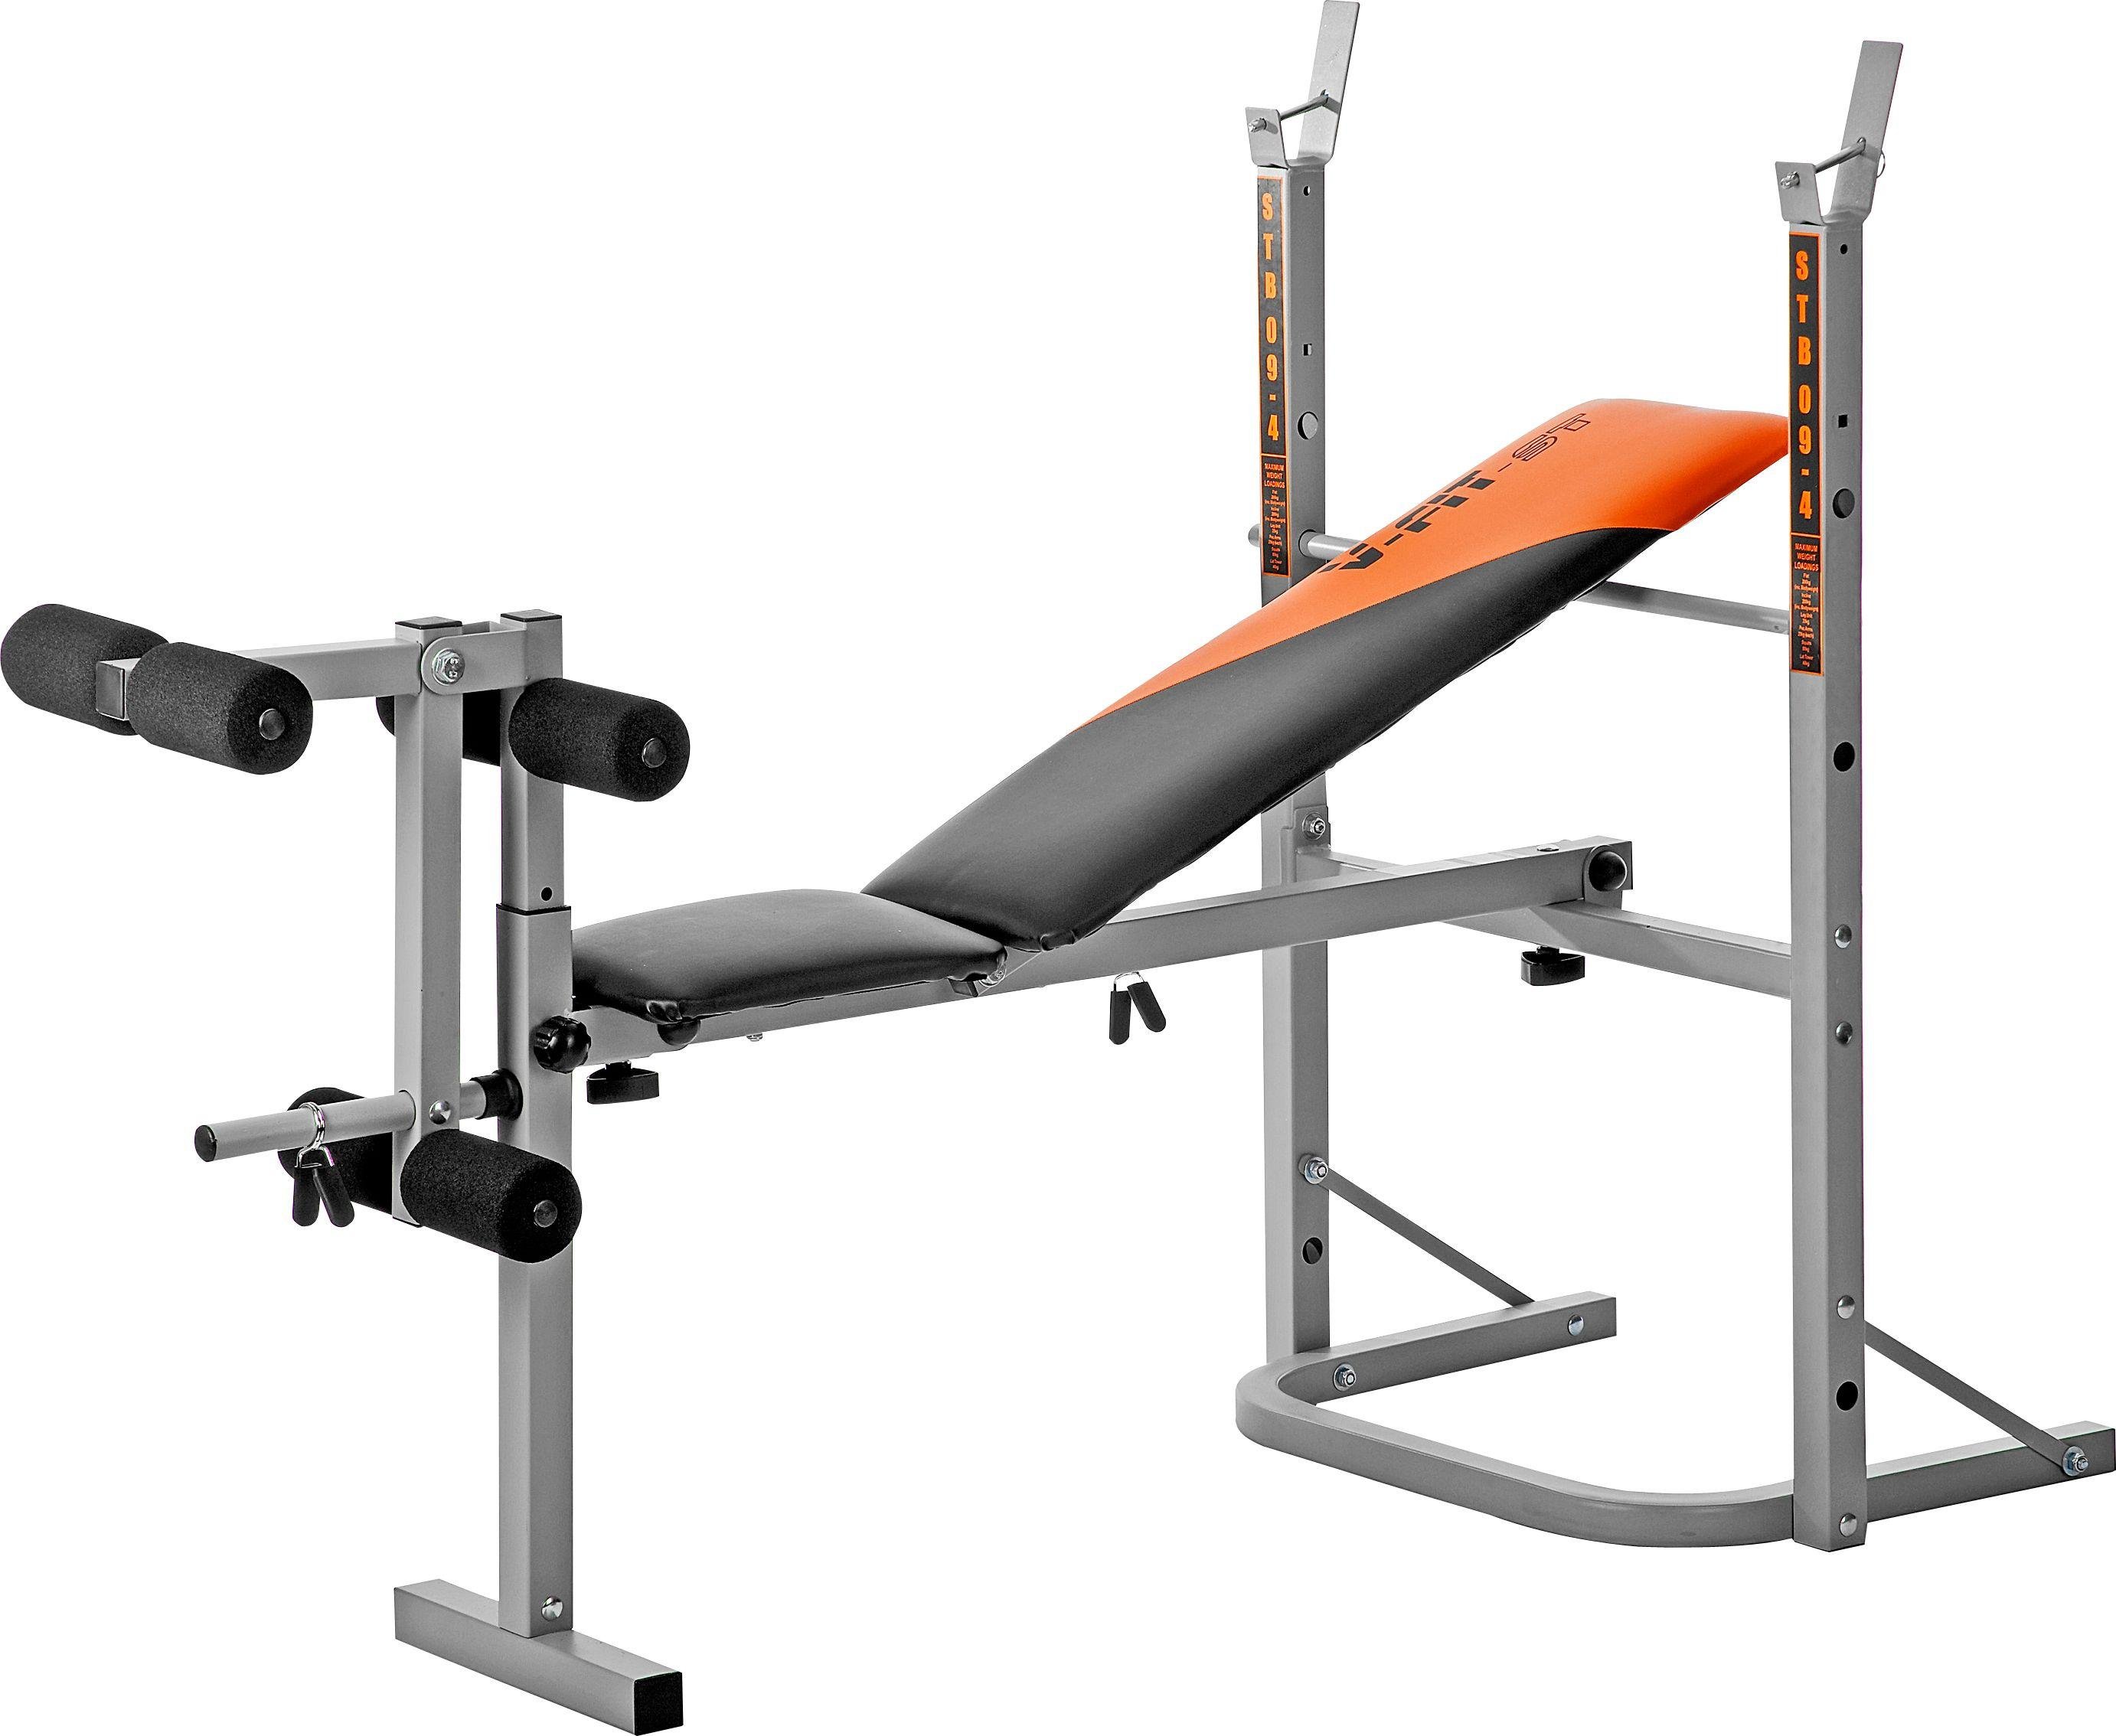 V-Fit Herculean STB 09-1 Folding Workout Bench